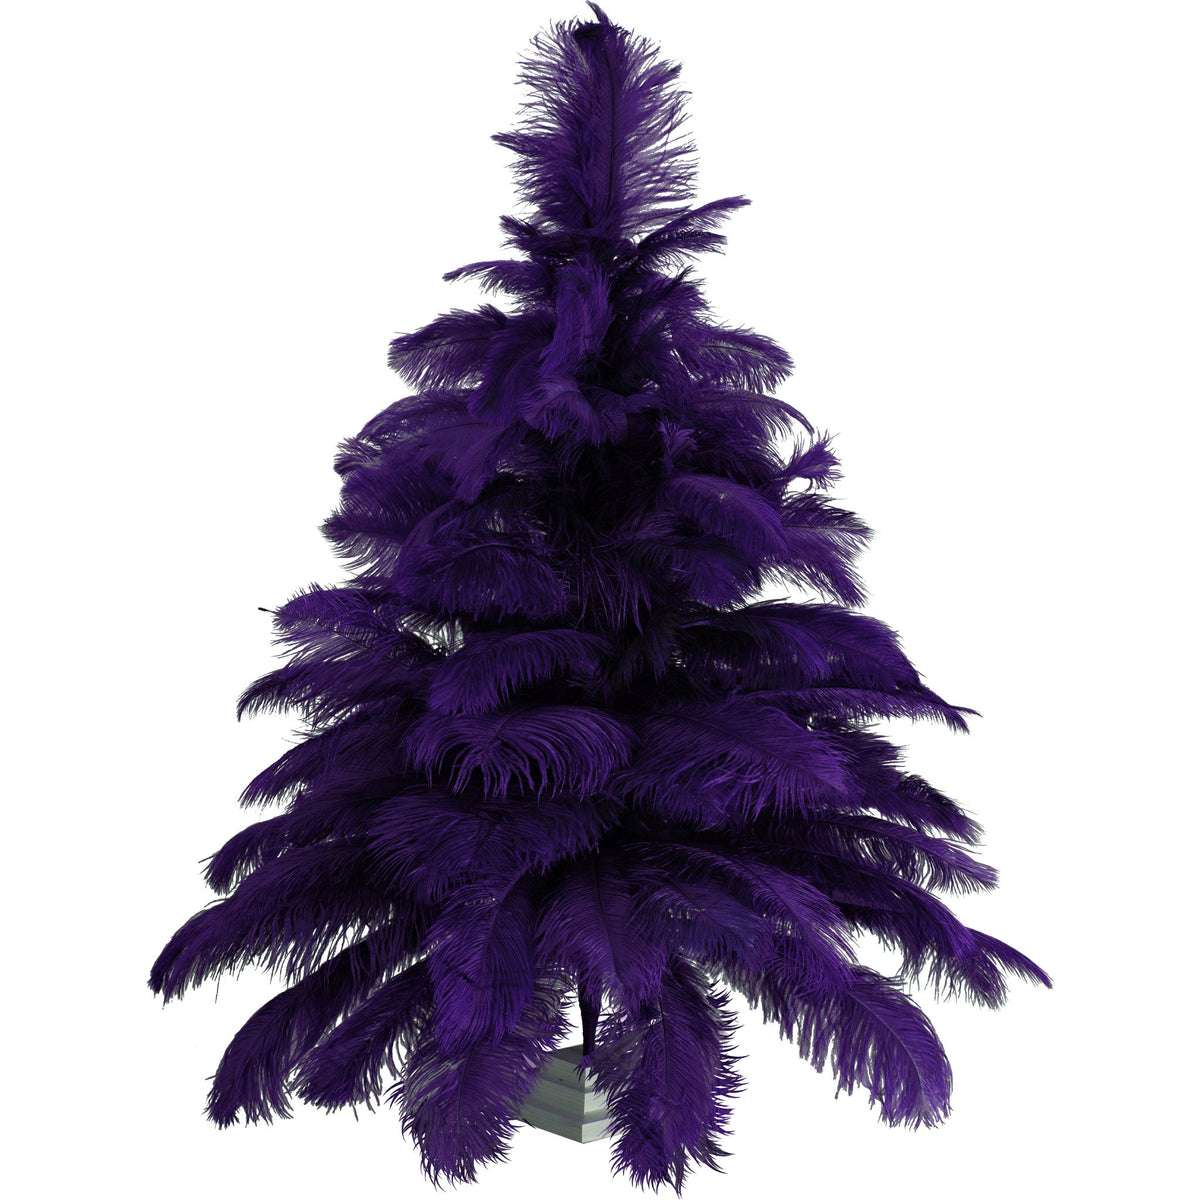 Introducing Lee Display's brand new Purple Ostrich Feather Christmas Trees! Made with real ostrich feathers